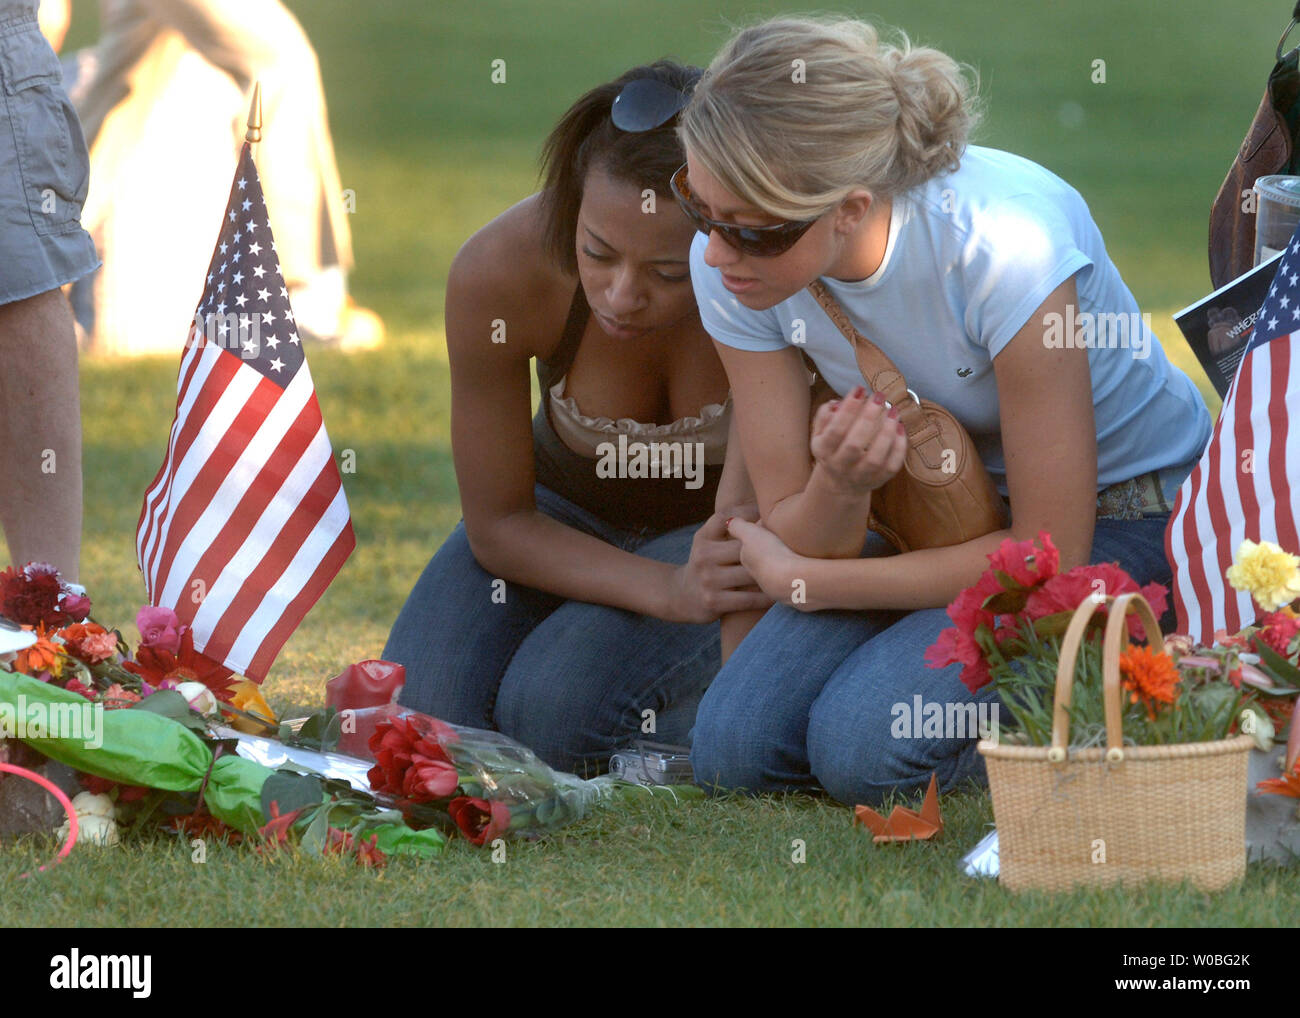 Young women visit a memorial on Drill Field, on the campus of Virginia Tech in Blacksburg, Virginia on April 22, 2007. Cho Seung-Hui, a student at Virginia Tech, went on a shooting spree and murdered 32 people on April 16, 2007. It was the deadliest school shooting in U.S. history. (UPI Photo/Kevin Dietsch) Stock Photo